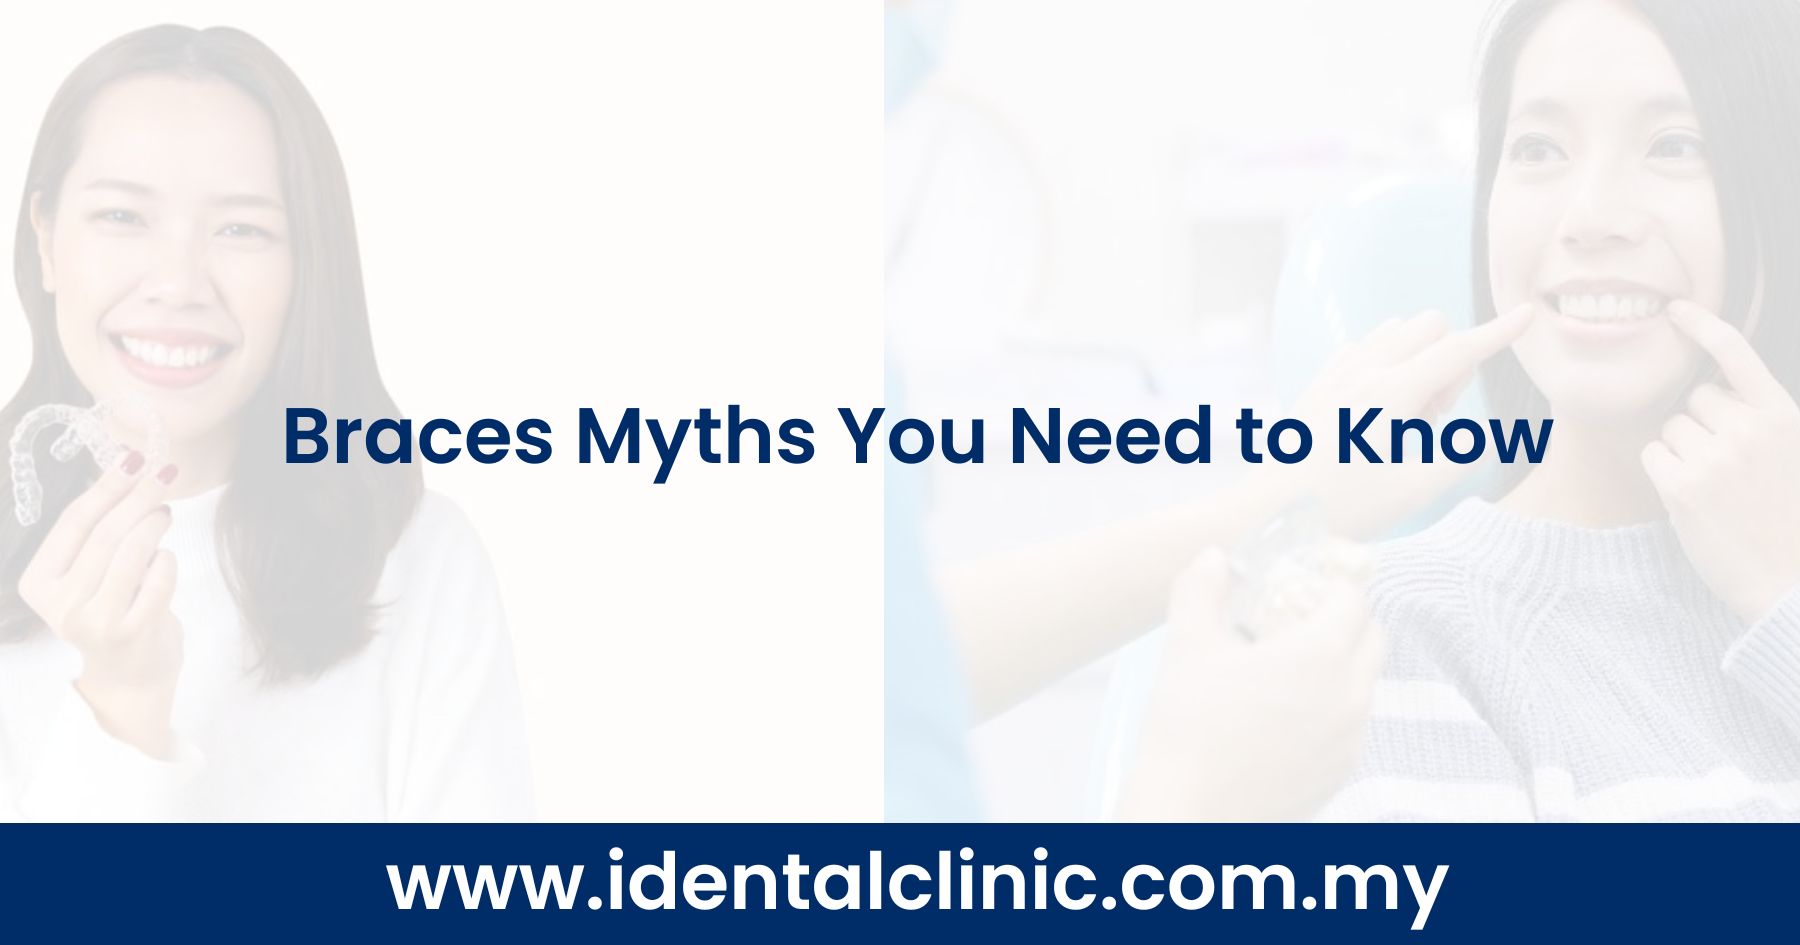 Braces Myths You Need to Know